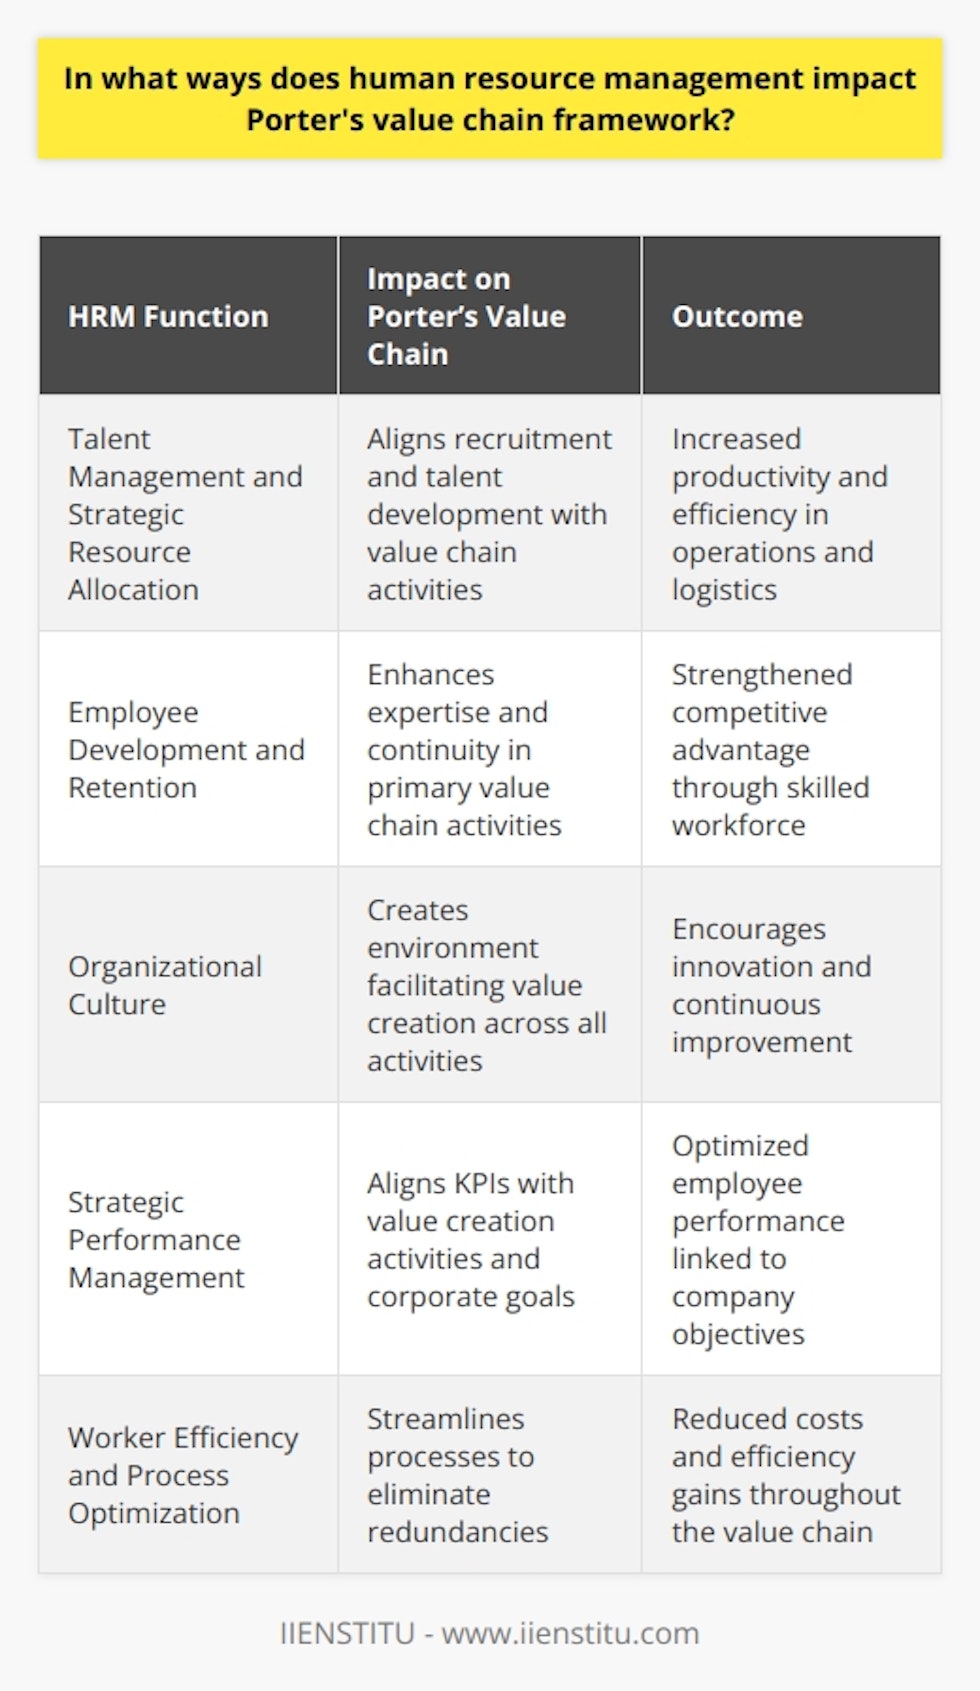 Human Resource Management (HRM) sits at the core of Porter's value chain framework, influencing both its primary and support activities to drive a company's competitive advantage. This framework, which is designed to analyze specific activities through which firms can create value and competitive advantage, is profoundly affected by HRM practices. The following sections detail how HRM intertwines with this strategic tool.Talent Management and Strategic Resource AllocationAt the heart of HRM's interaction with the value chain is the acquisition and management of human capital. HRM strategies in recruiting the right talent align with primary value chain activities such as operations and outbound logistics, ensuring that staff possess the necessary skills to enhance productivity and efficiency. Training programs tailor-made to bridge competency gaps are instrumental in maintaining a workforce that can adapt and excel as market demands evolve, directly feeding into Porter's notion of a value-driven organization.Moreover, HRM's role in the strategic allocation of resources within a firm ensures that the most valuable assets—people—are effectively utilized. By aligning HRM strategies such as succession planning and leadership development with the company's strategic goals, organizations can better prepare to meet future challenges and mobilize their workforce accordingly.Enhancing Value Through Human CapitalAnother dimension is the value generated through employee development and retention strategies. HRM involves designing career pathways and developmental opportunities that help in retaining top talent. This retention is crucial for maintaining continuity and deepening expertise within the organization, especially in performing the primary activities of Porter's value chain.Creating an Empowering Organizational CultureThe influence of HRM is also felt in creating and nurturing a robust organizational culture, characterized by clear communication, strong alignment around a shared vision, and high employee engagement. This aspect of HRM impacts the underlying environment where all activities in the value chain occur. By cultivating an atmosphere where creativity and innovation are encouraged, HRM helps sustain a competitive advantage by promoting continuous improvement across the value chain.Strategic Performance ManagementThe construction of strategic performance management frameworks represents another critical point of intersection between HRM and the value chain. By setting up key performance indicators (KPIs) that resonate with the value creation activities, HRM ensures employees’ objectives are aligned with corporate goals. The implementation of feedback and appraisal systems, alongside appropriate reward mechanisms, directly influences the value chain by incentivizing high performance and recognizing teams’ or individuals' contributions to the company's objectives.Worker Efficiency and Process OptimizationFinally, through the continuous analysis and improvement of work processes and conditions, HRM affects the value chain. Lean HRM practices that streamline processes and eliminate redundancies contribute to cutting costs and reducing turnaround times across primary activities such as operations and logistics. In doing so, HRM enhances the value delivered to the end customer and fortifies the organization's position in the marketplace.In summary, Human Resource Management casts a wide net across the value chain framework, impacting each link—from procurement and internal operations to marketing, sales, and after-sales service. HRM's interventions in highlighting the importance of human capital, nurturing talent, promulgating a conducive culture, and refining performance management come together to reinforce a company's value chain, thereby cementing competitive advantage.